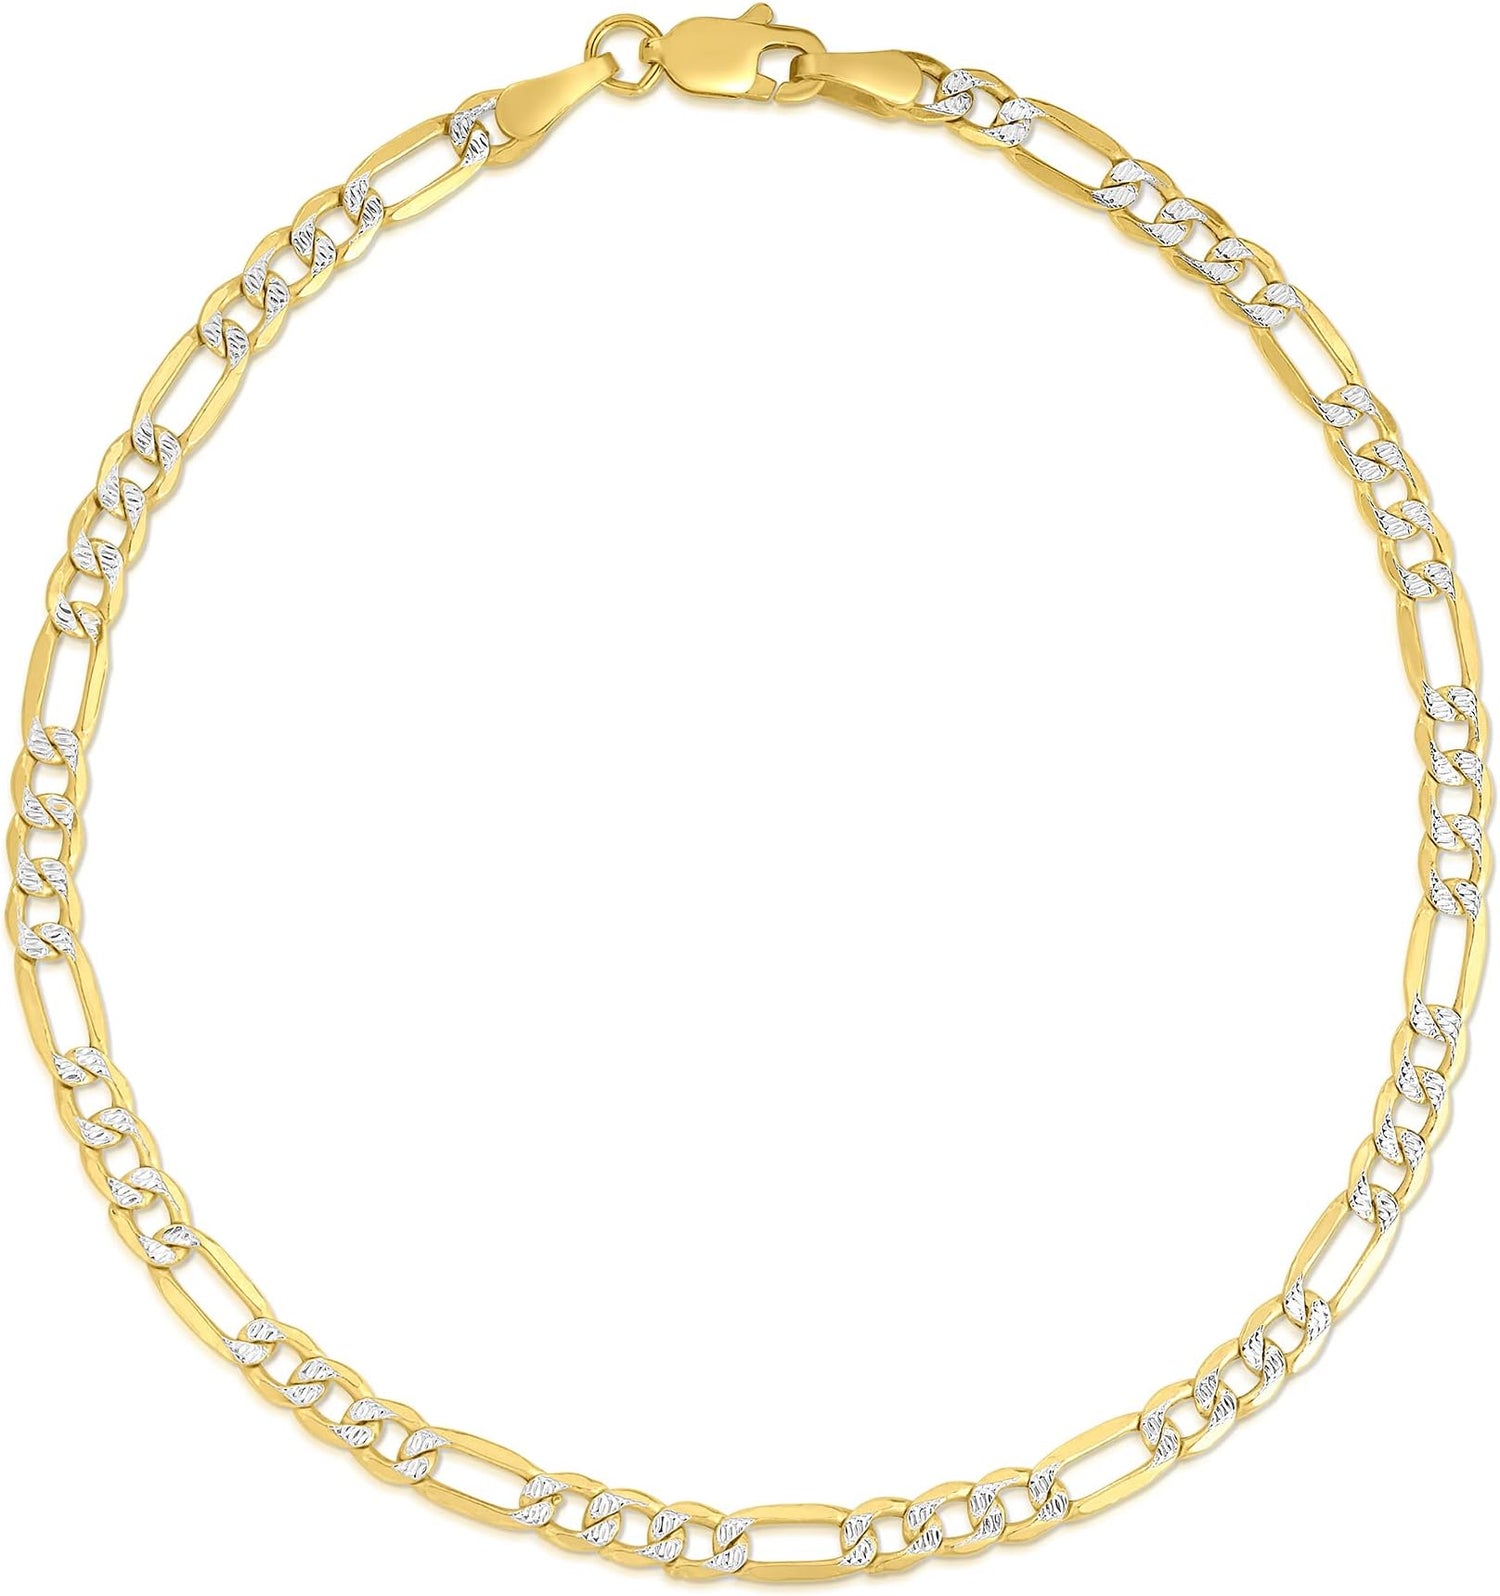 10k Two-Tone Gold 3.5mm Lite Pave Diamond Cut Figaro Chain Link Bracelet or Anklet